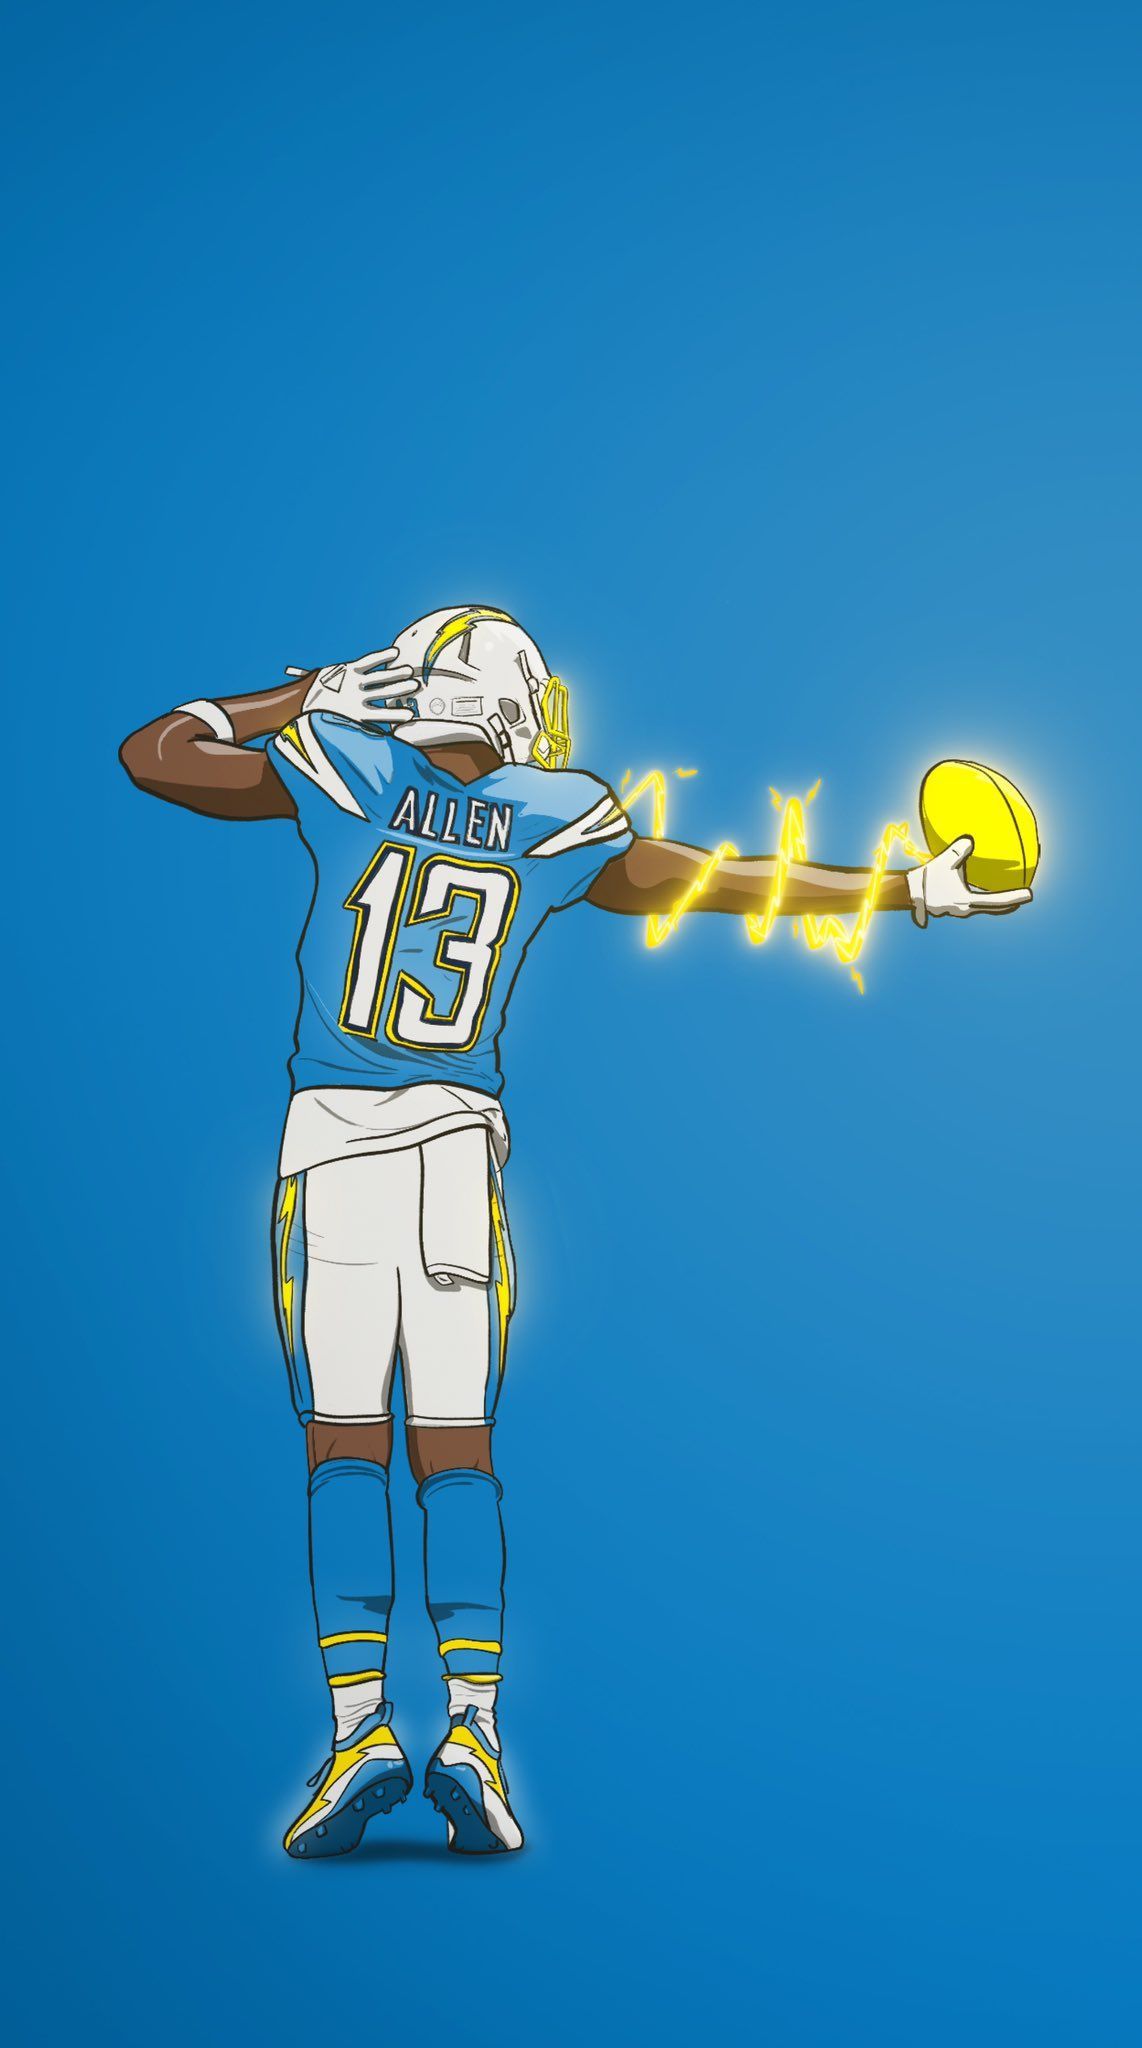 Chargers Wallpaper Free Chargers Background